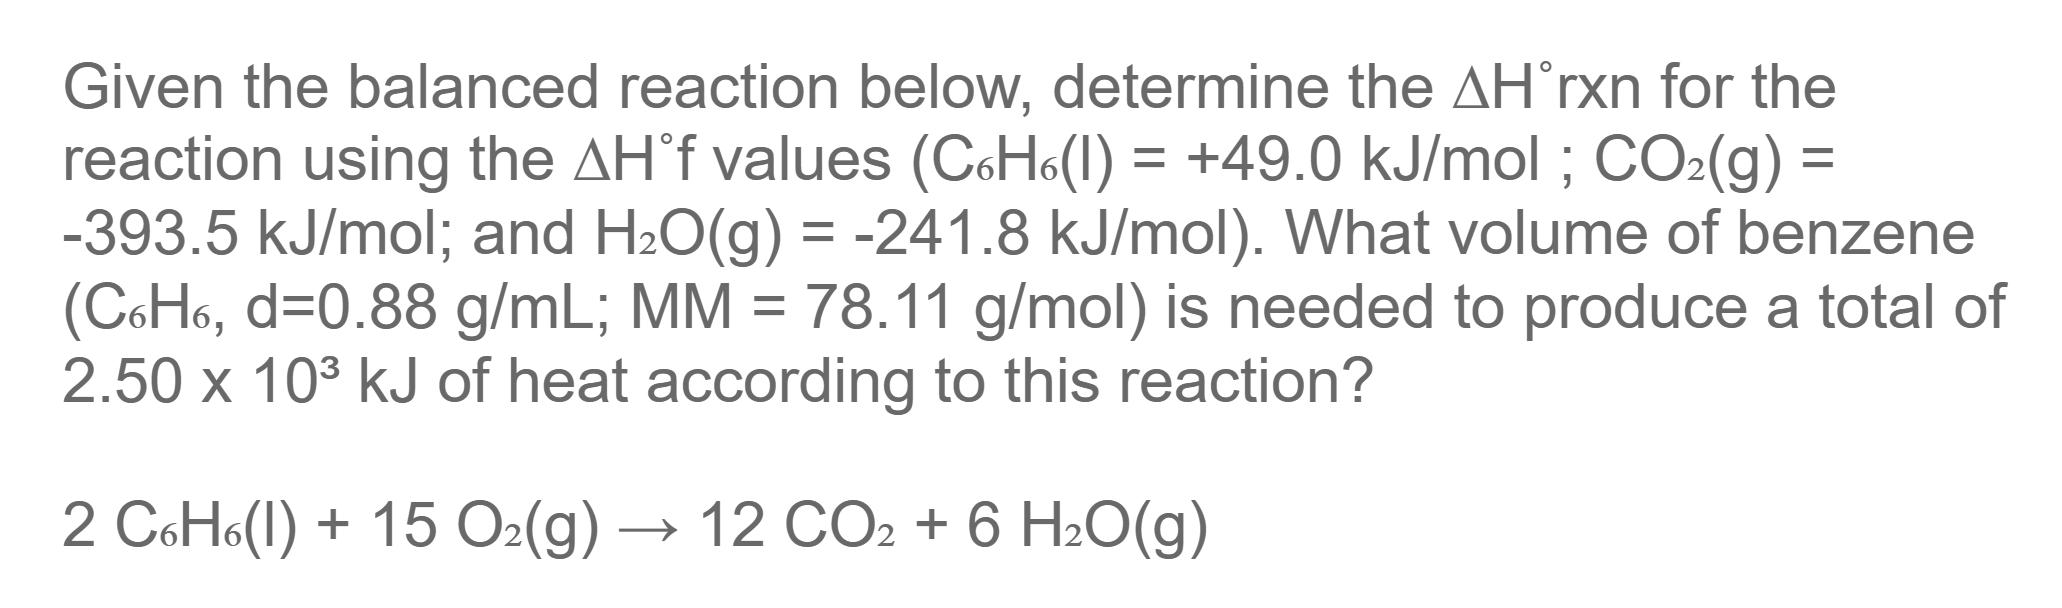 SOLVED: Given the balanced reaction below, determine the ΔH^∘rxn for ...